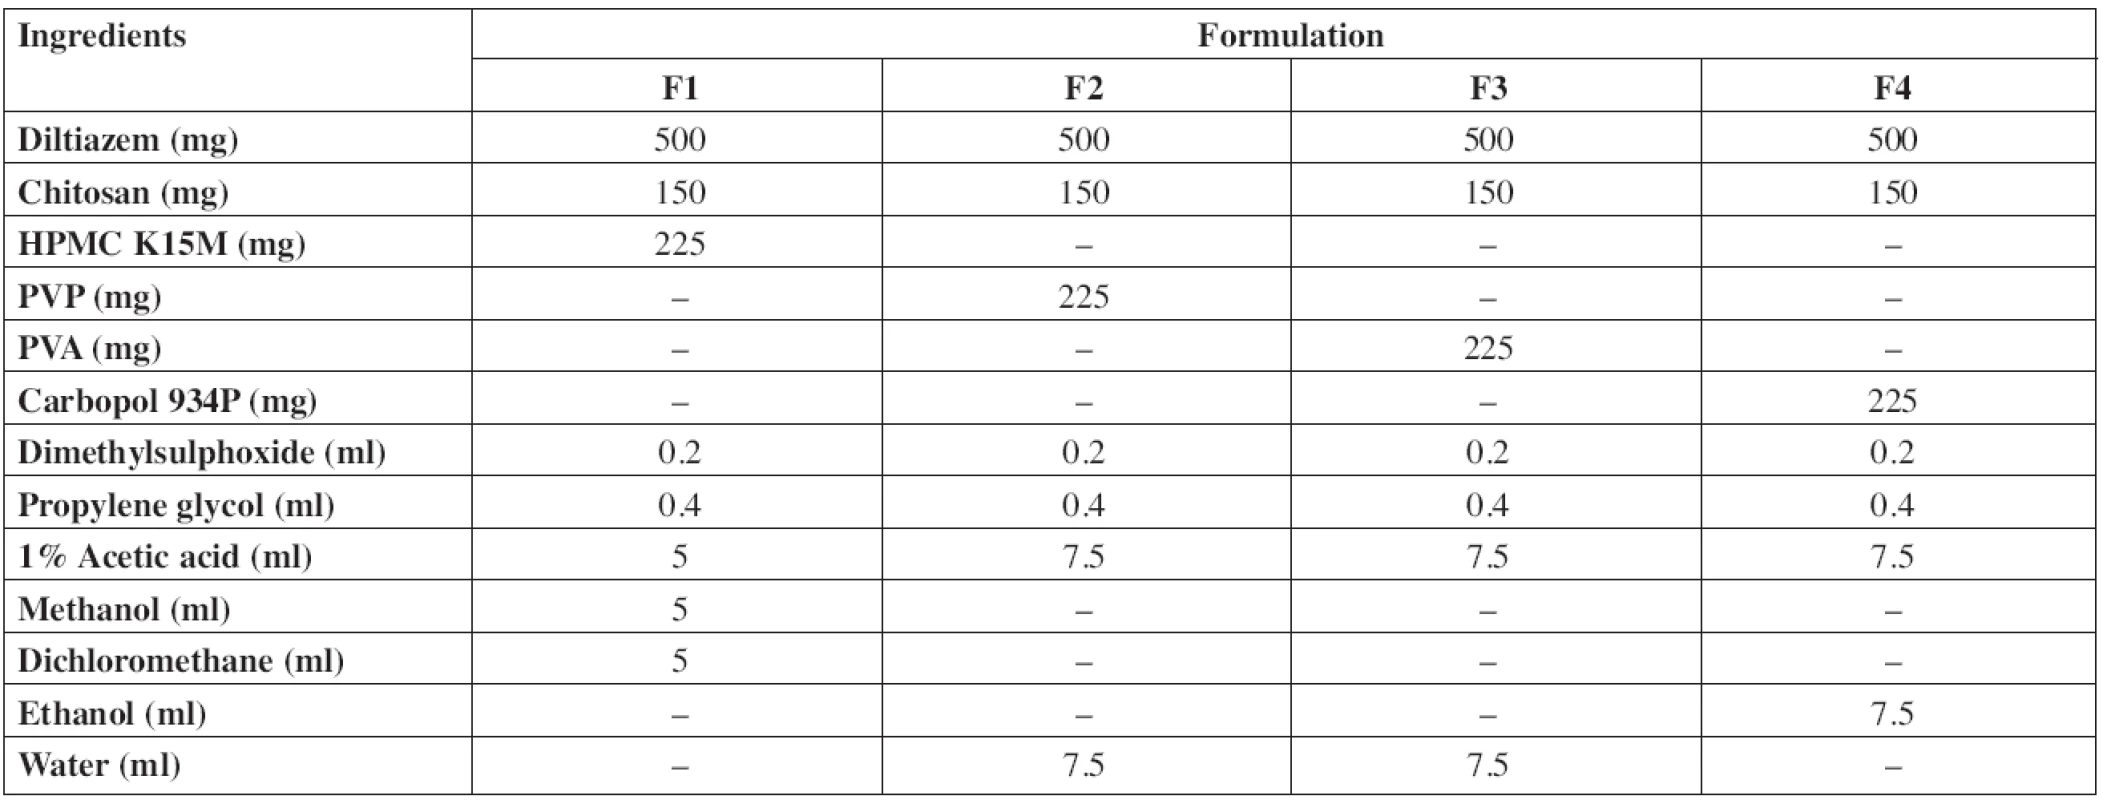 Composition of diltiazem hydrochloride buccal patches